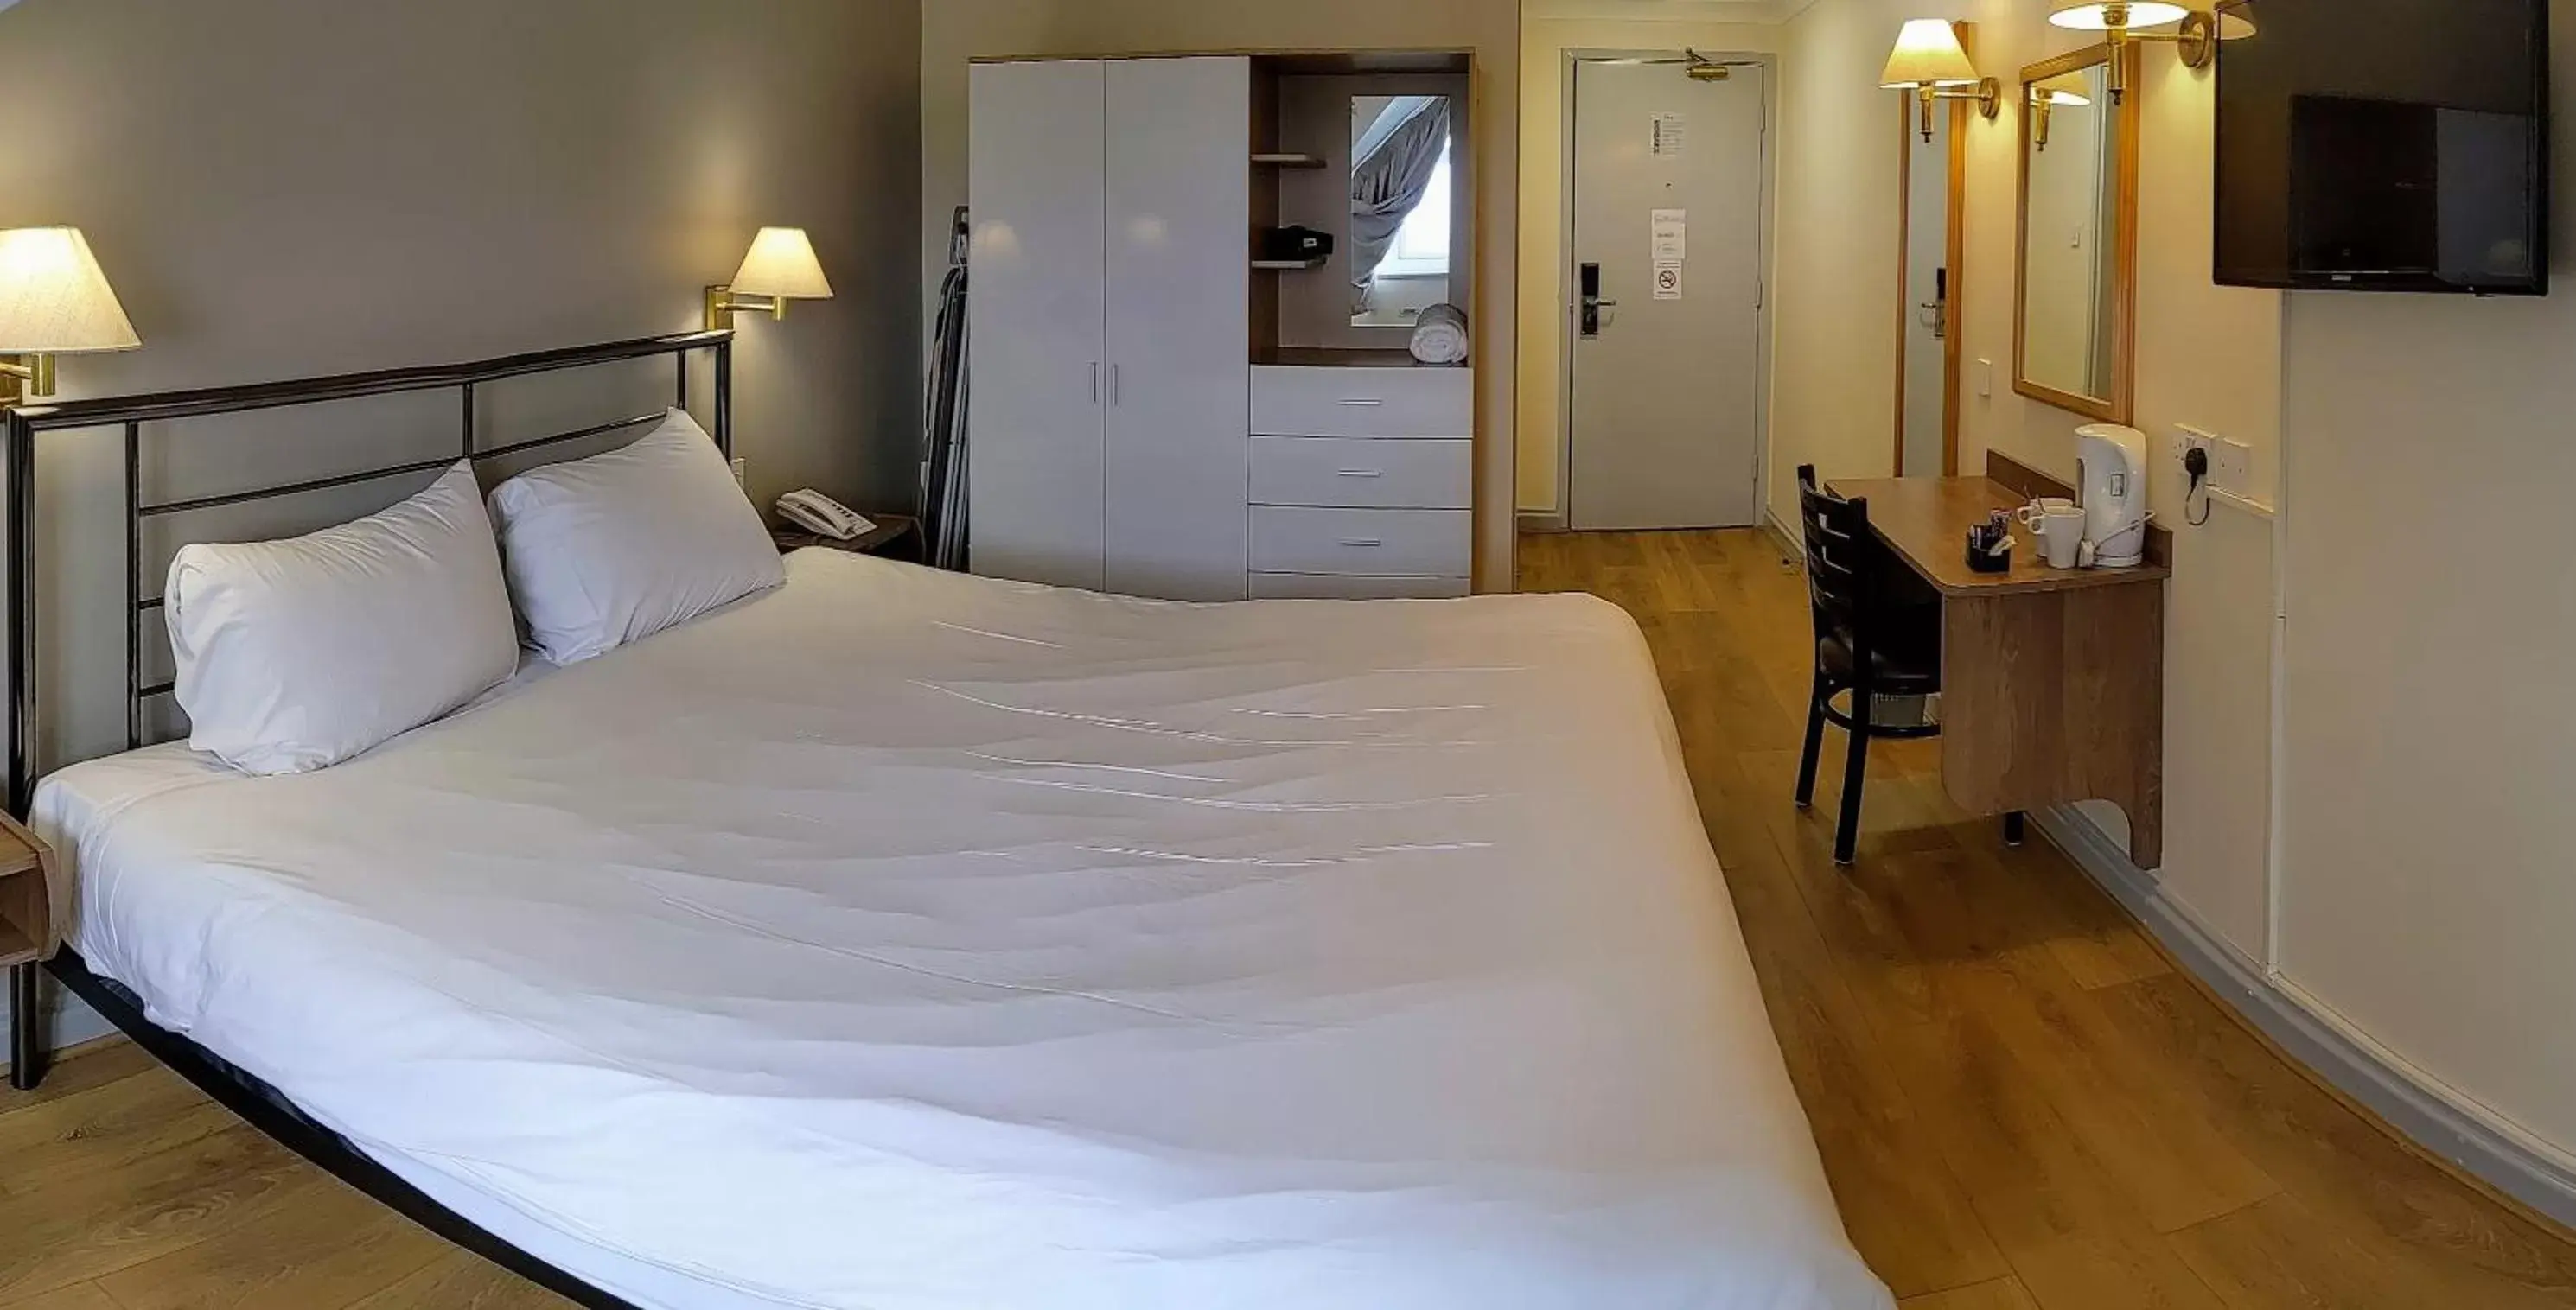 Bed in 247Hotel.com